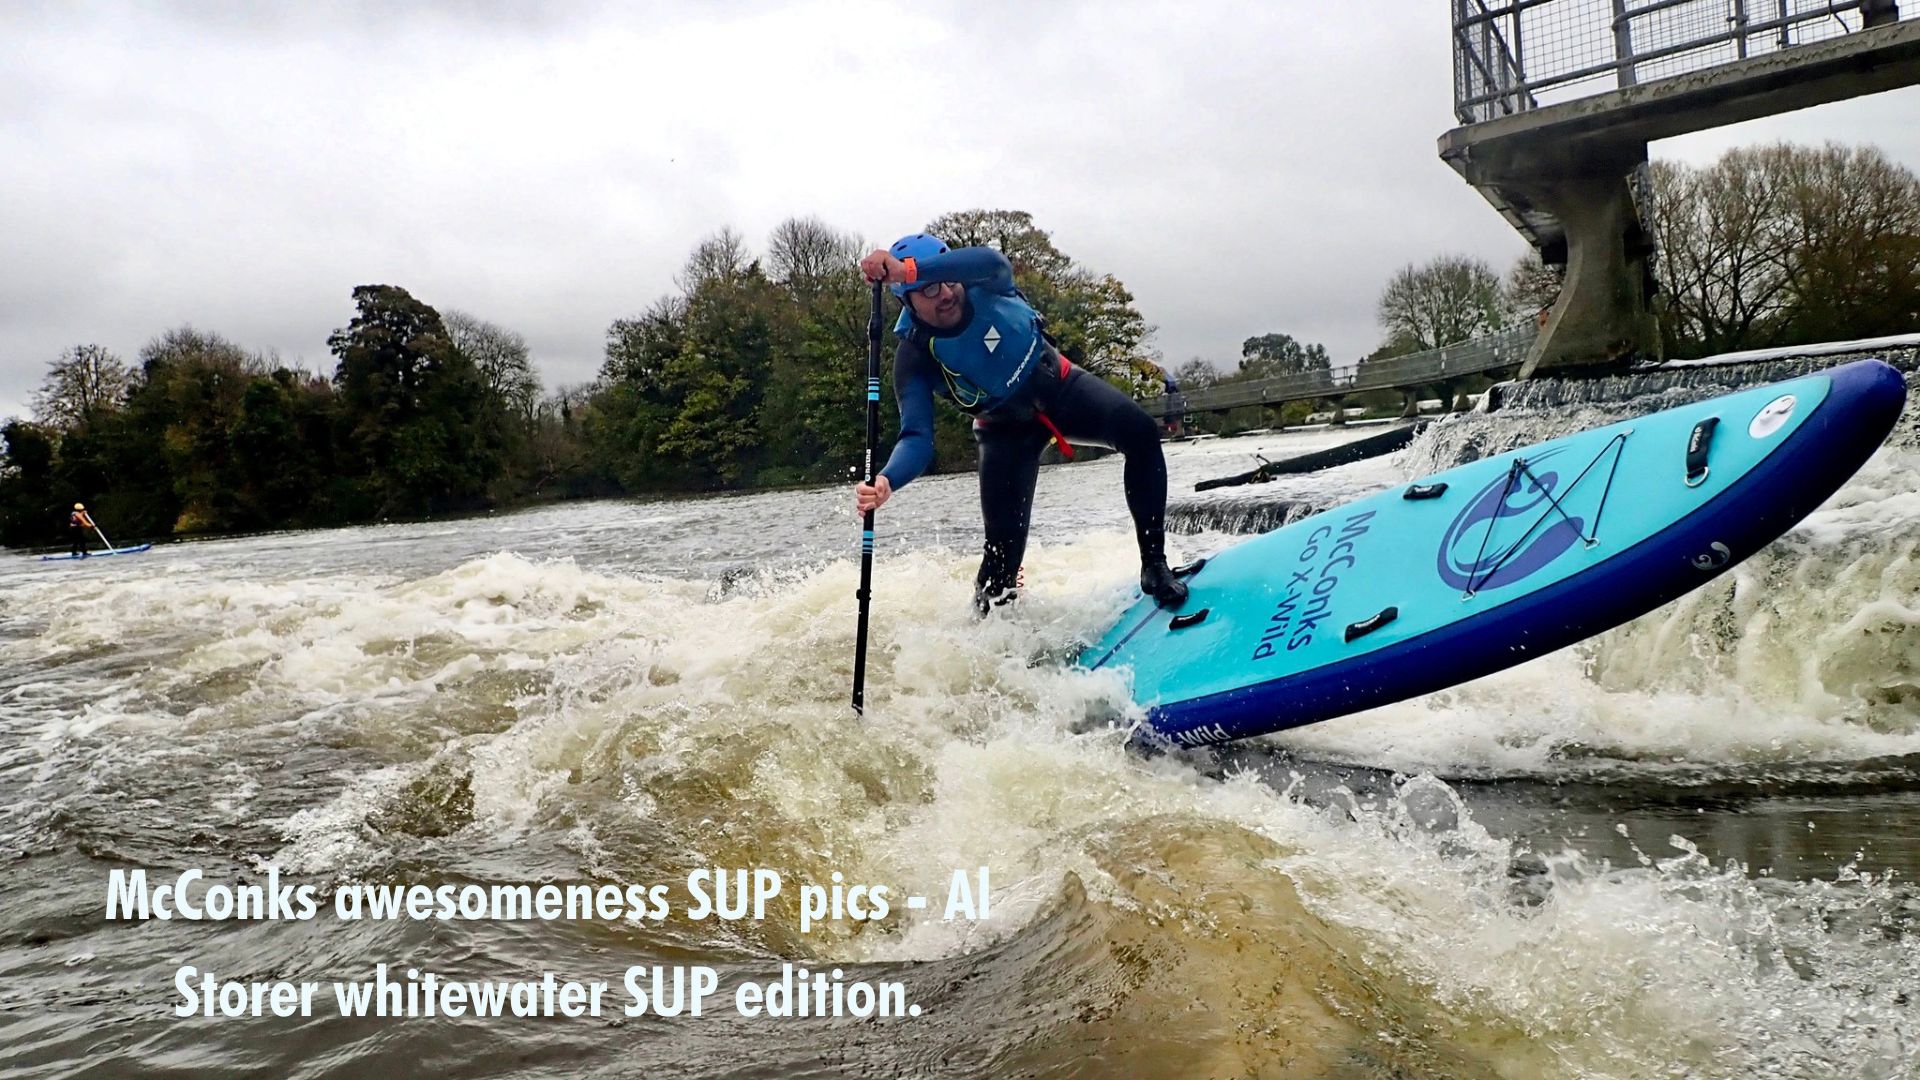 Read more about the article McConks awesomeness SUP pics – Al Storer whitewater SUP edition.